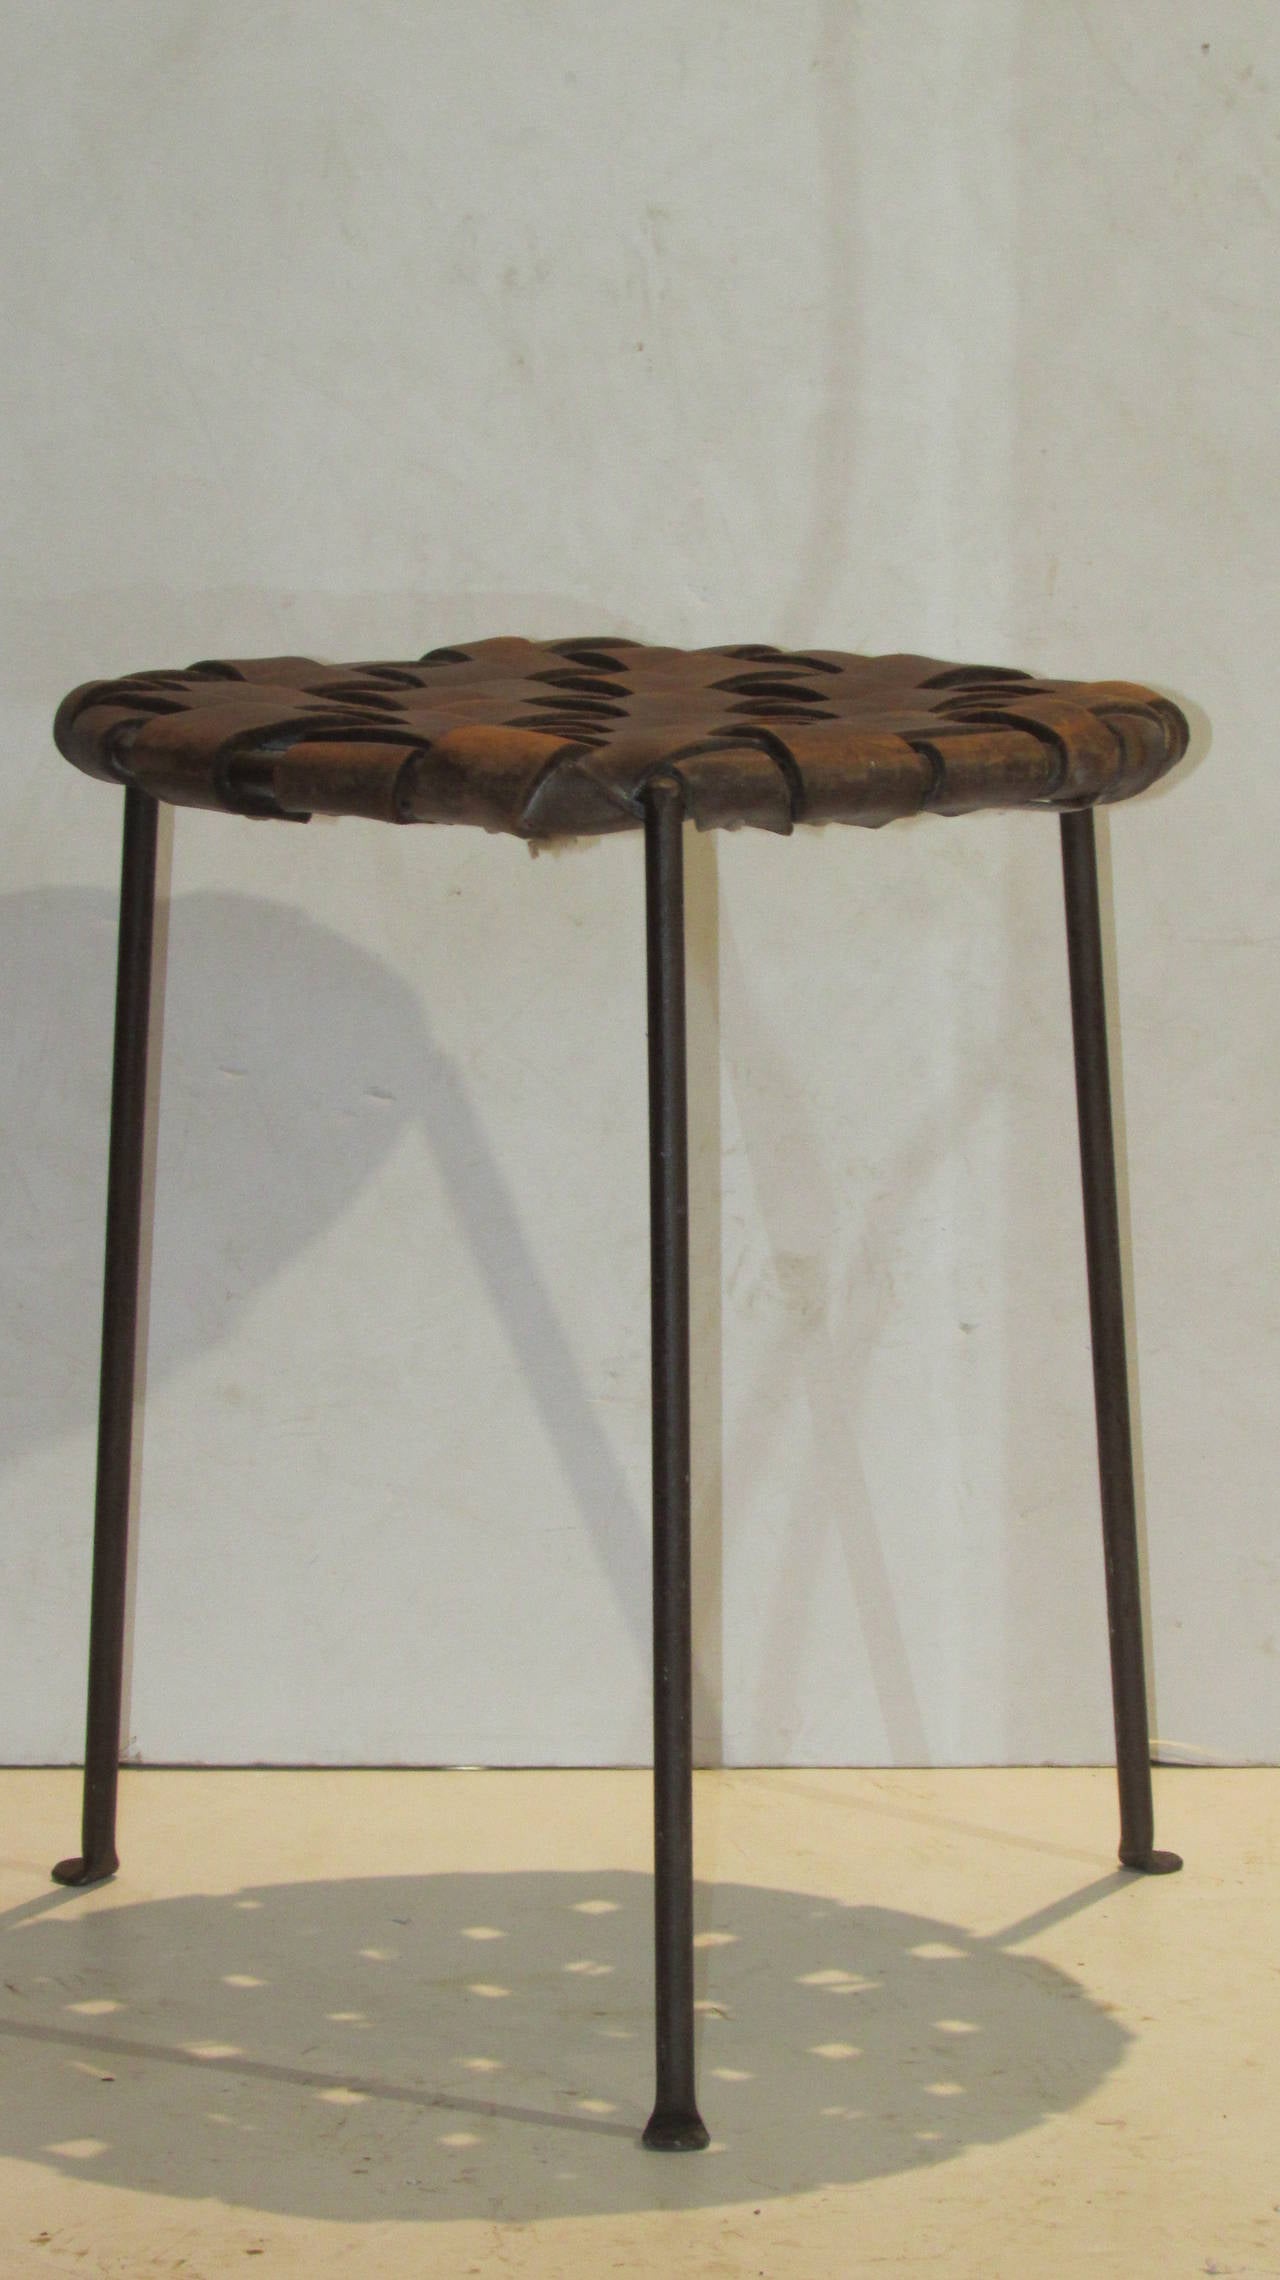 A beautiful original example of this hard to find three-legged pad foot hand-wrought iron stool with woven wide strap leather seat designed by Lila Swift and David Monell, American, circa 1950s.